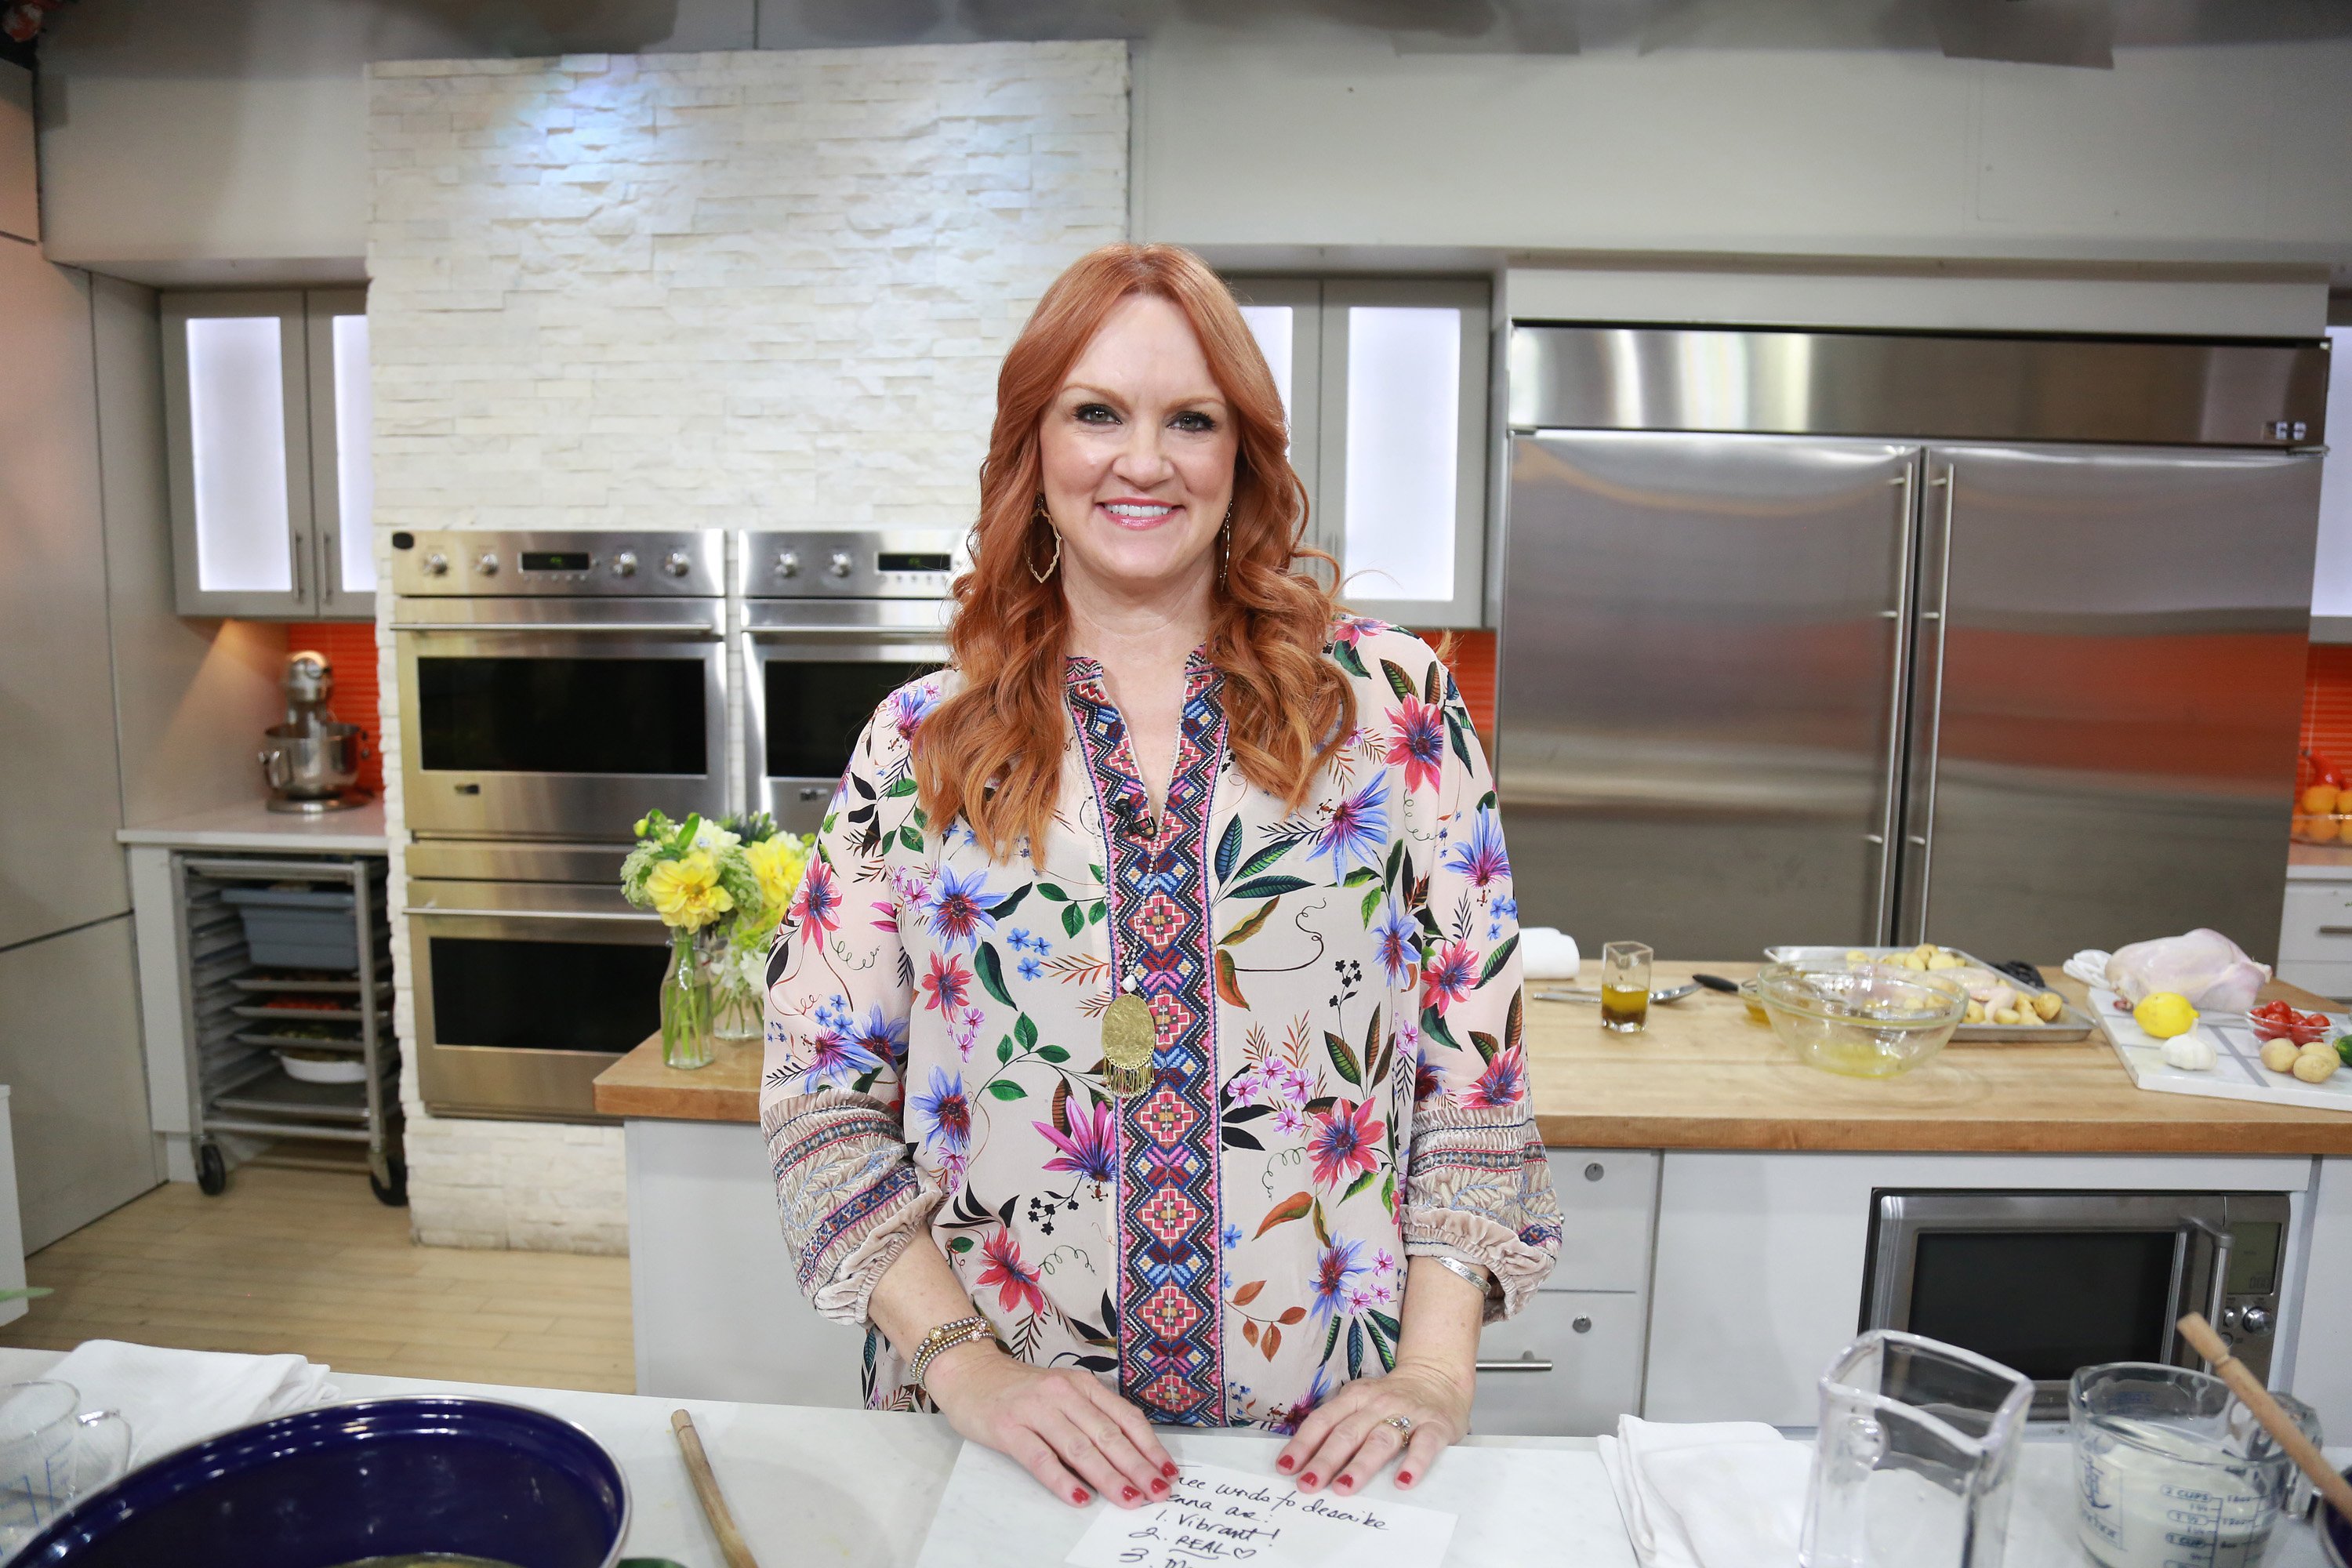 The Pioneer Woman Ree Drummond stands in the kitchen at the Today show while wearing a floral shirt.